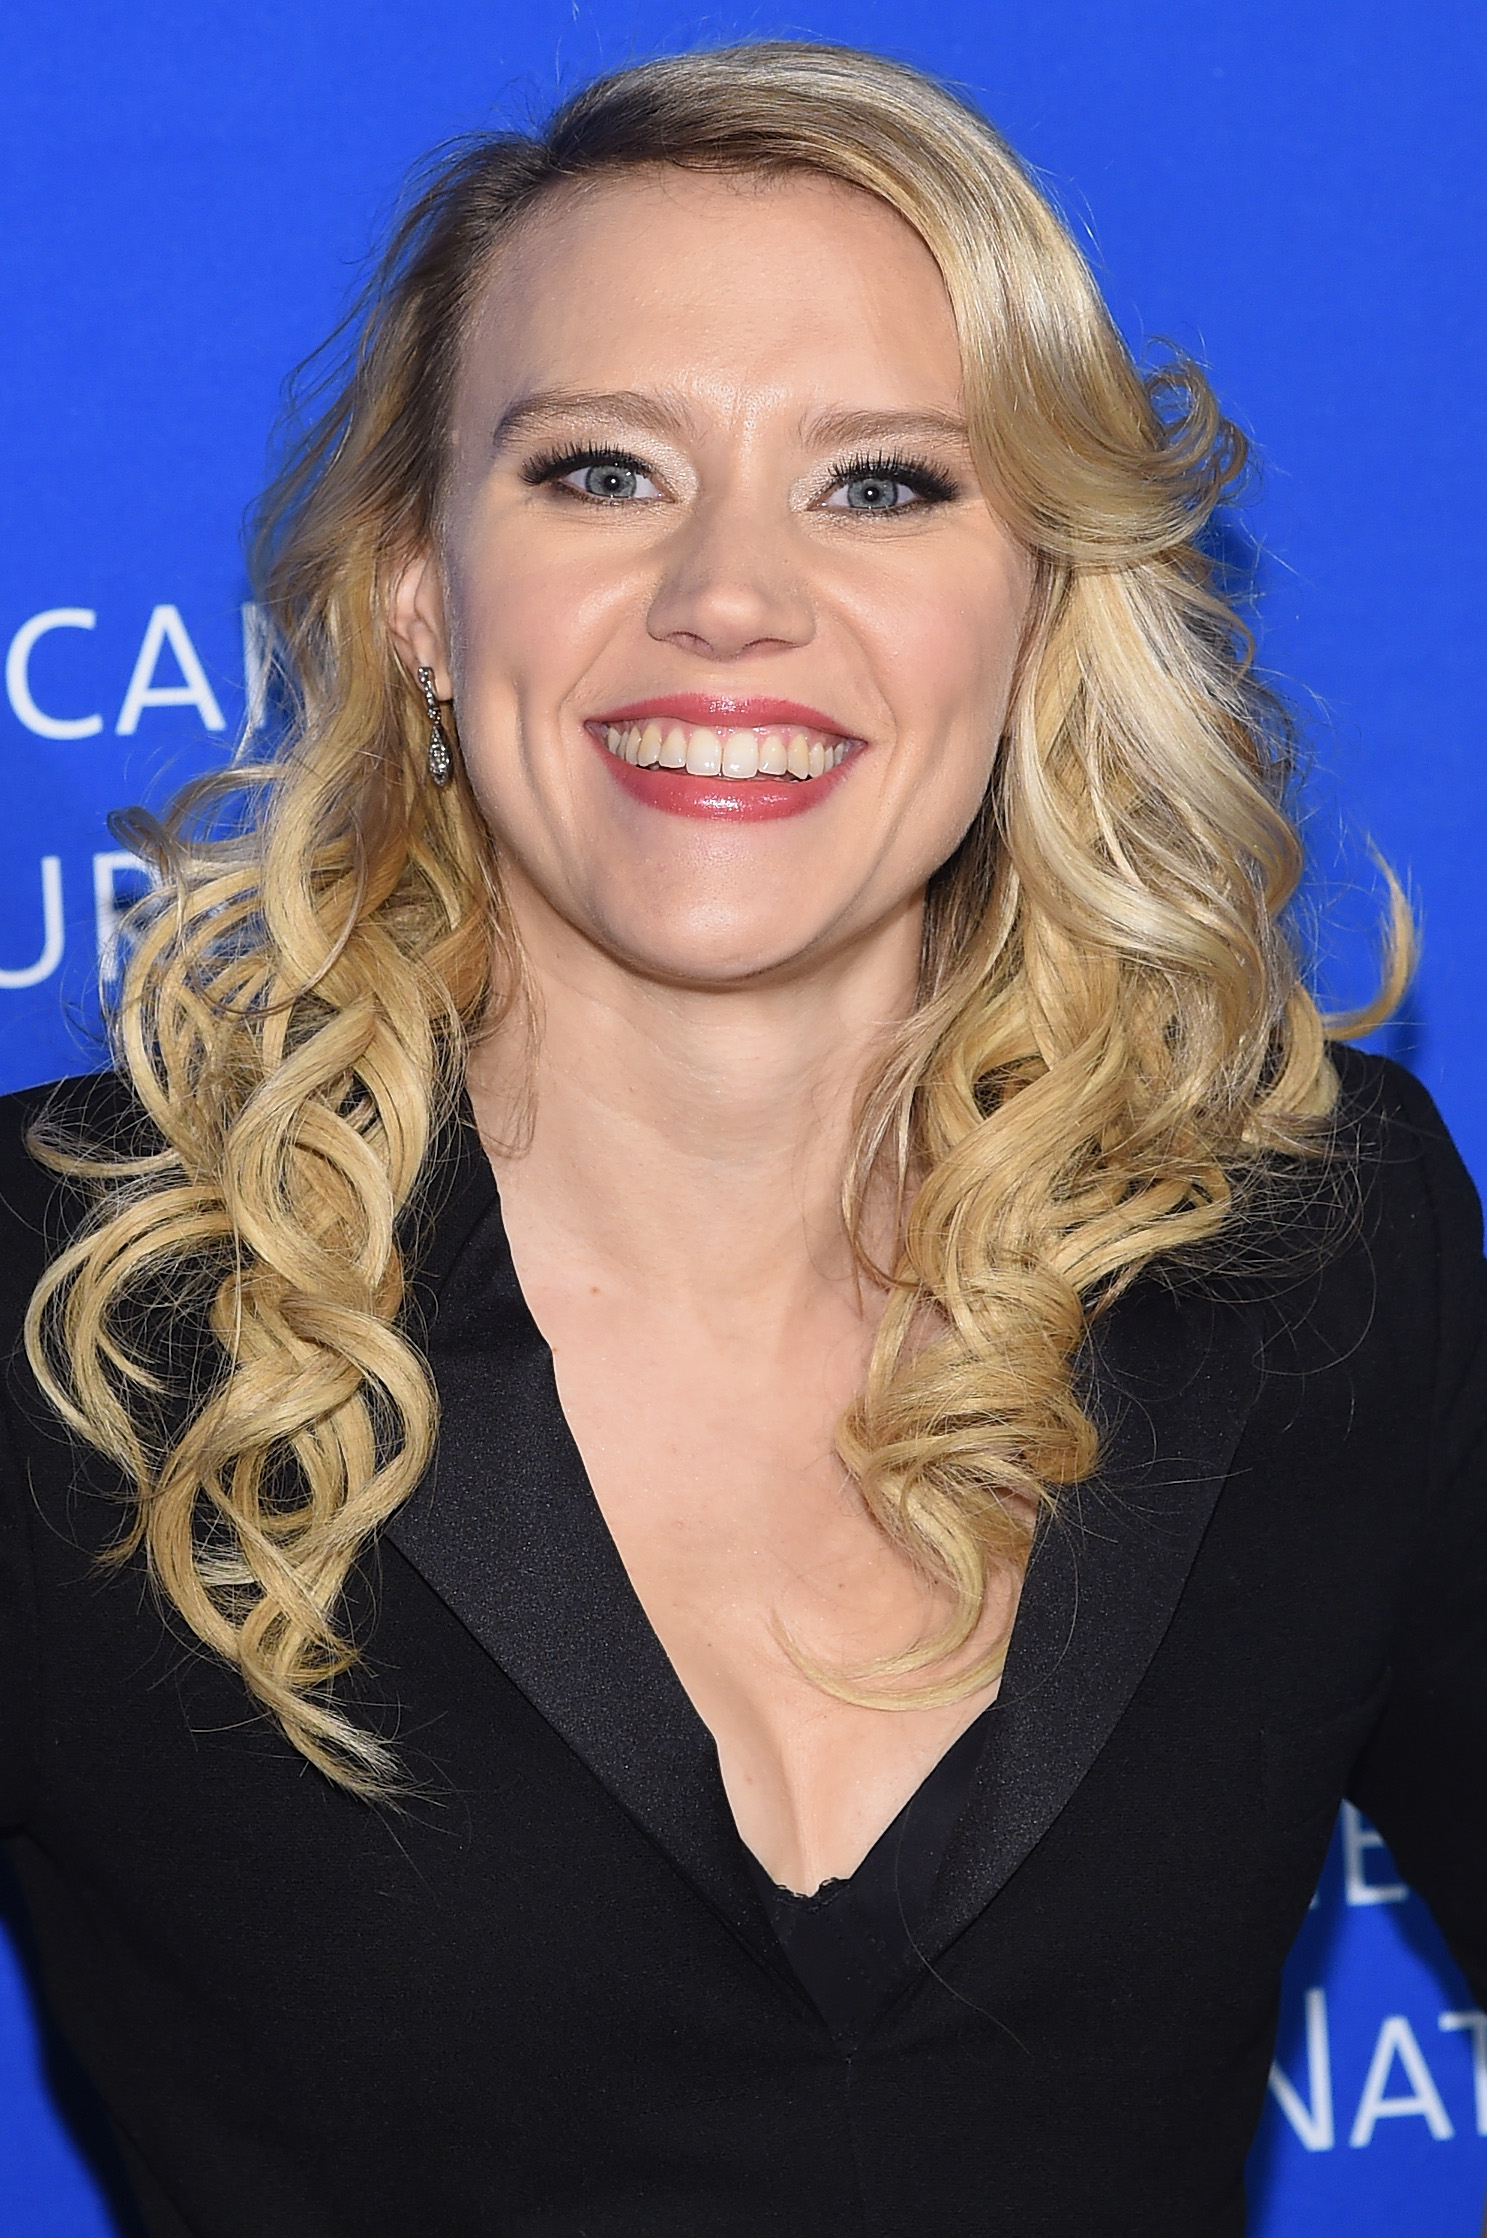 attends the 2014 Museum Gala at American Museum of Natural History on November 20, 2014 in New York City.